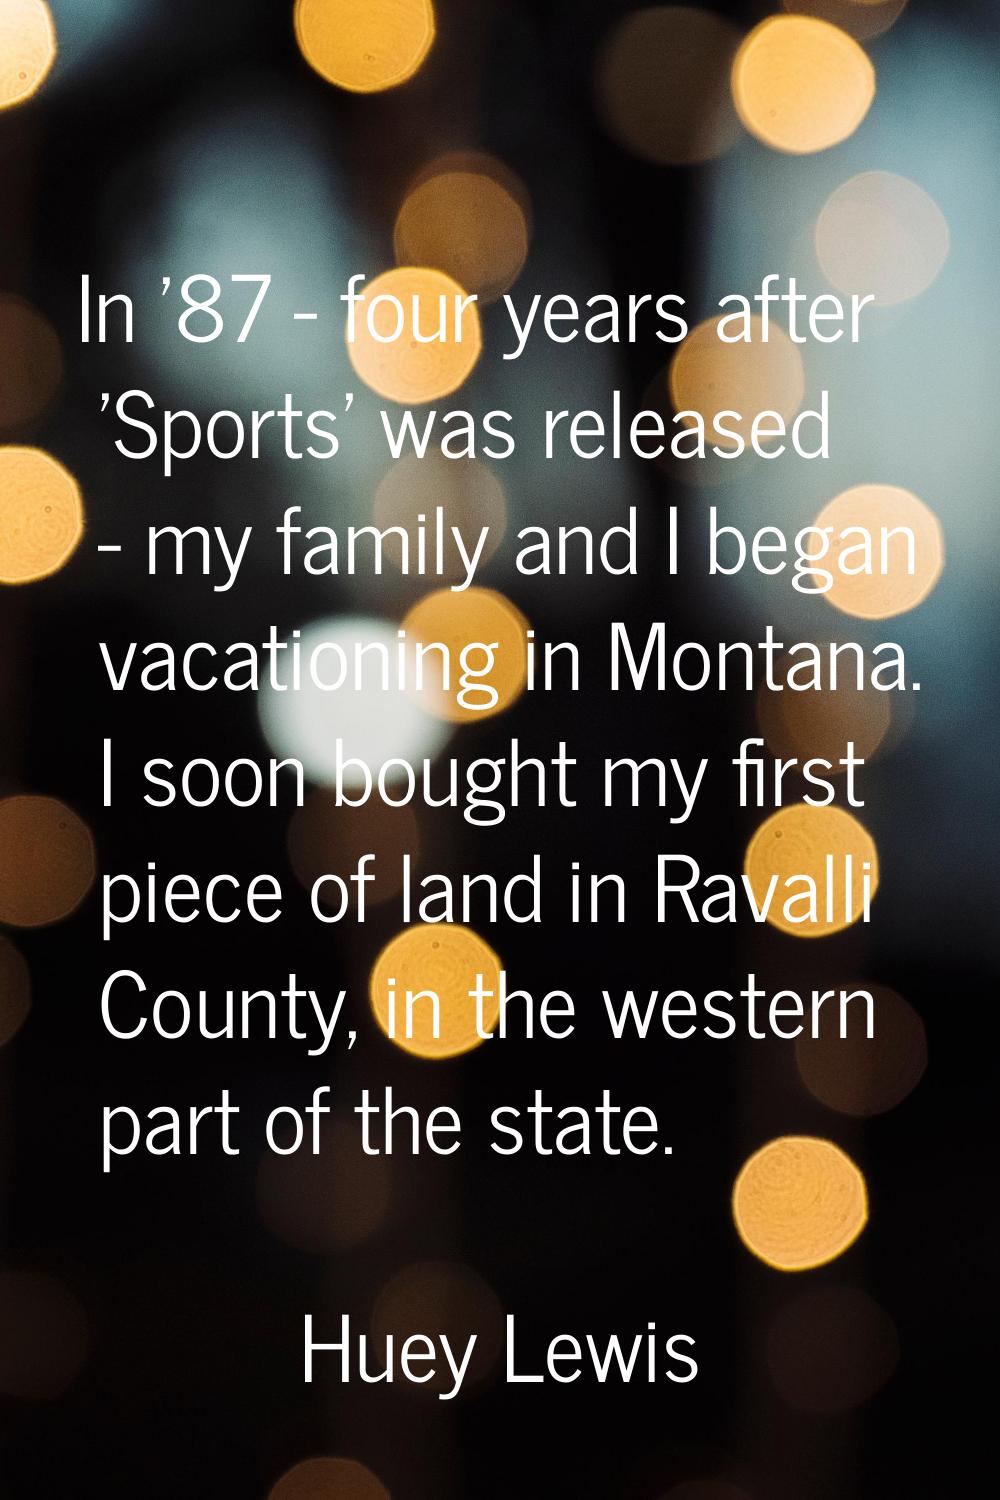 In '87 - four years after 'Sports' was released - my family and I began vacationing in Montana. I s